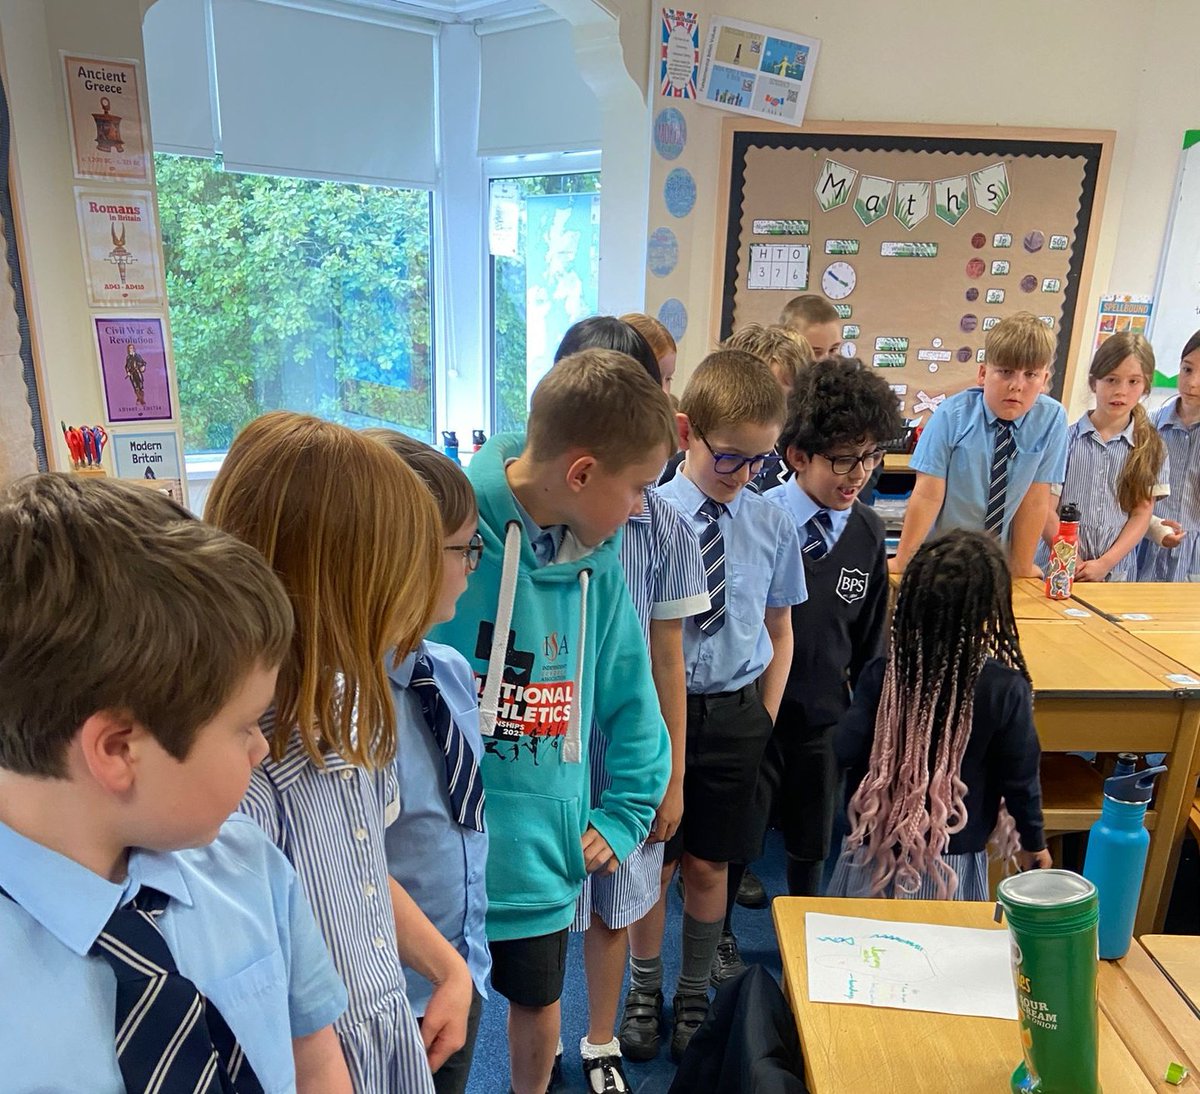 To challenge the Kindergarten children further with their Maths, they visited different classes to estimate, record and check how many pupils were in each. #BPSAchieve #BPSEngage #EYFS #nursery #preprep #independentschool